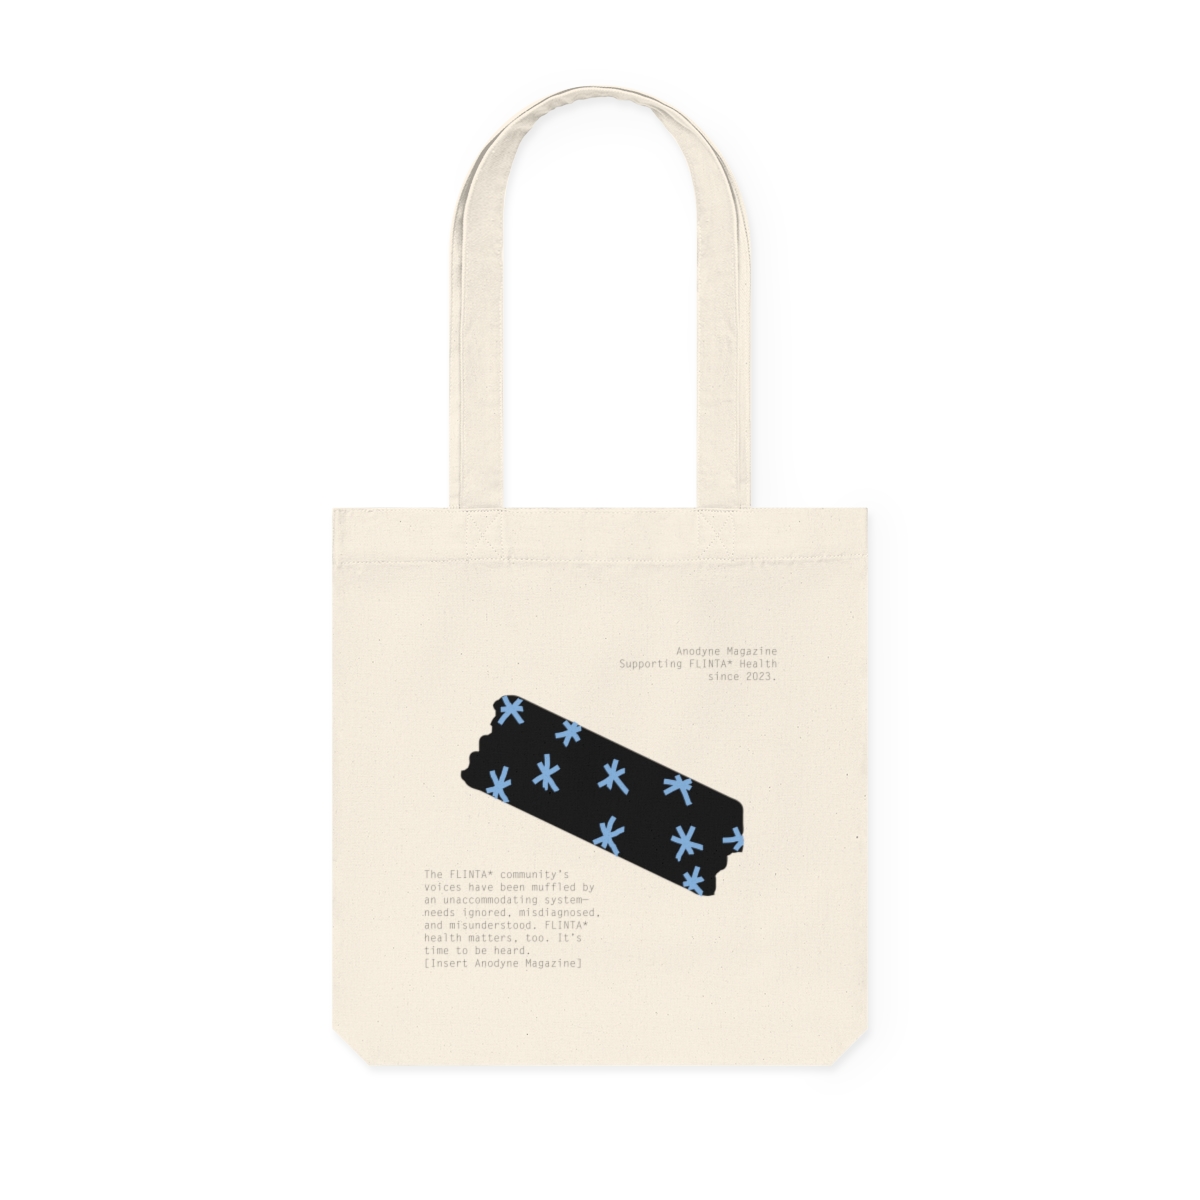 Anodyne Recycled Cotton Tote Bag product thumbnail image